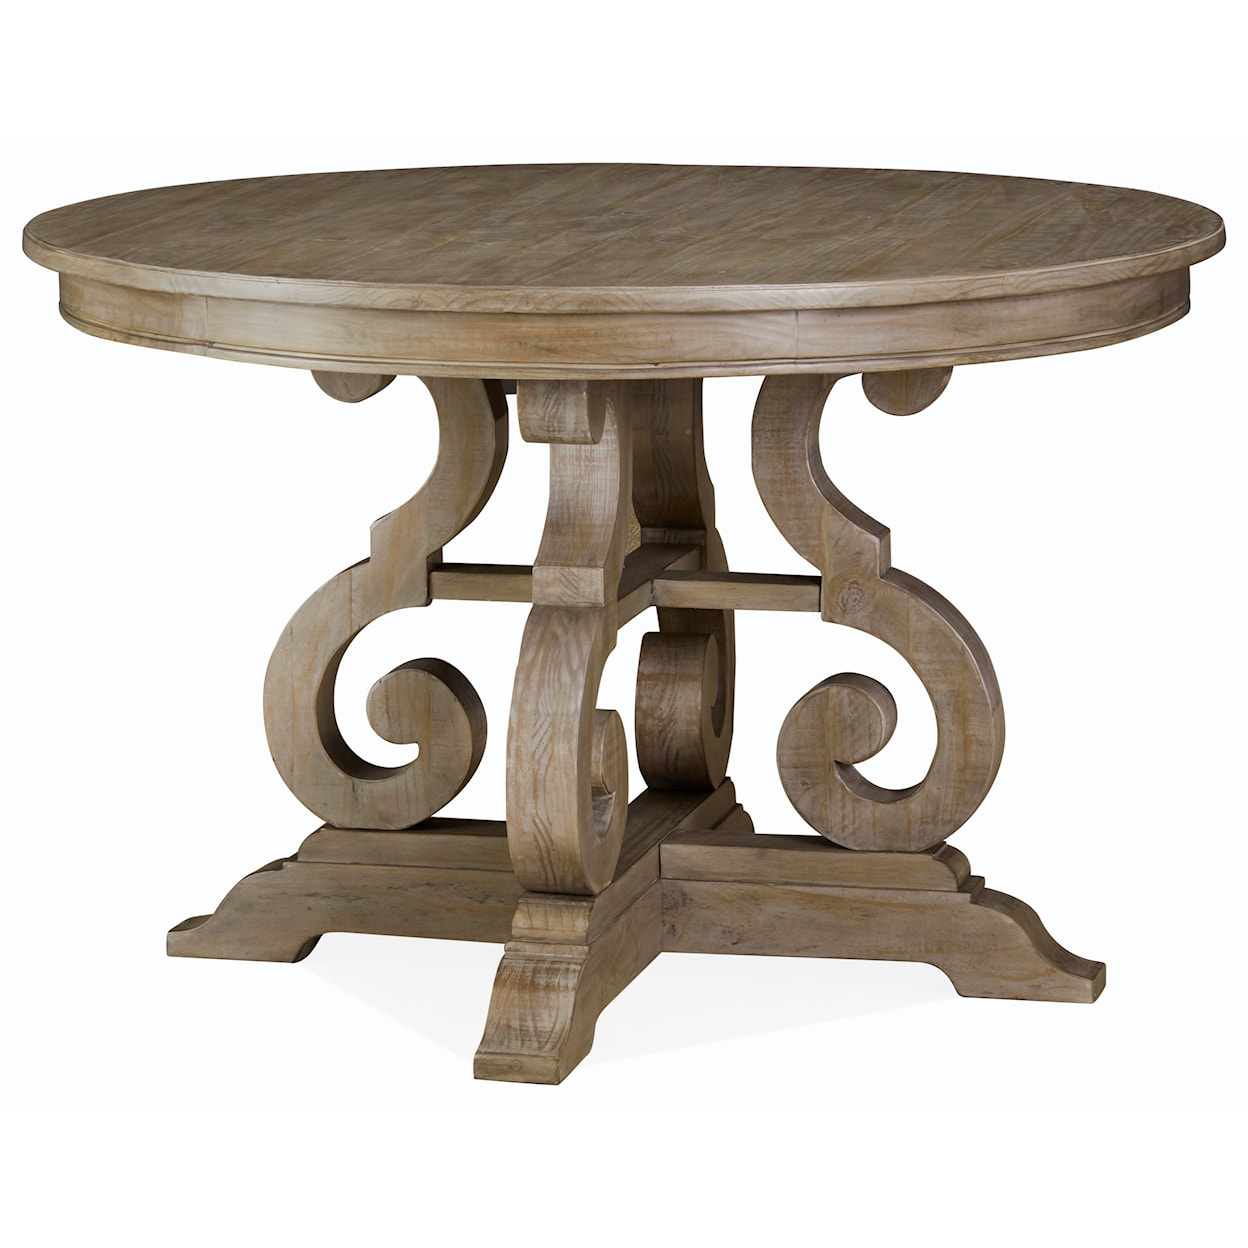 Magnussen Home Tinley Park Dining 48" Round Dining Table